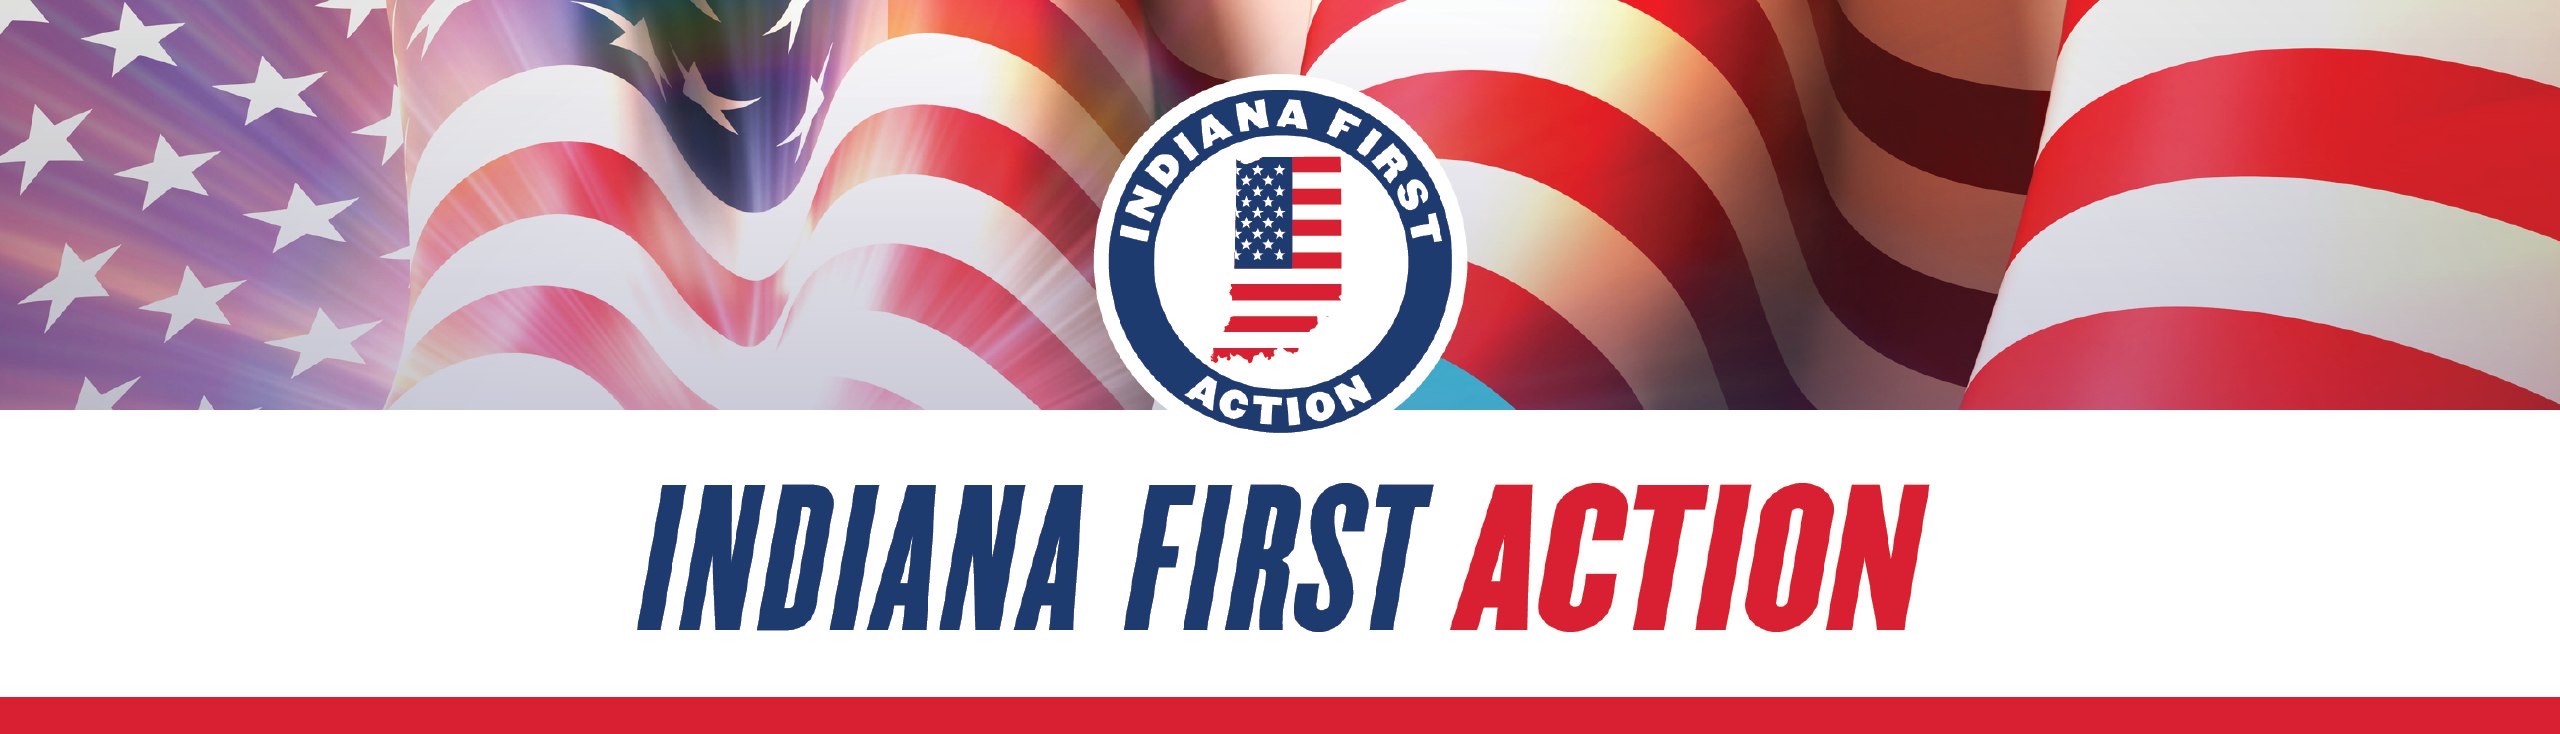 Moment of Truth Summit: Indiana - Indiana First Action